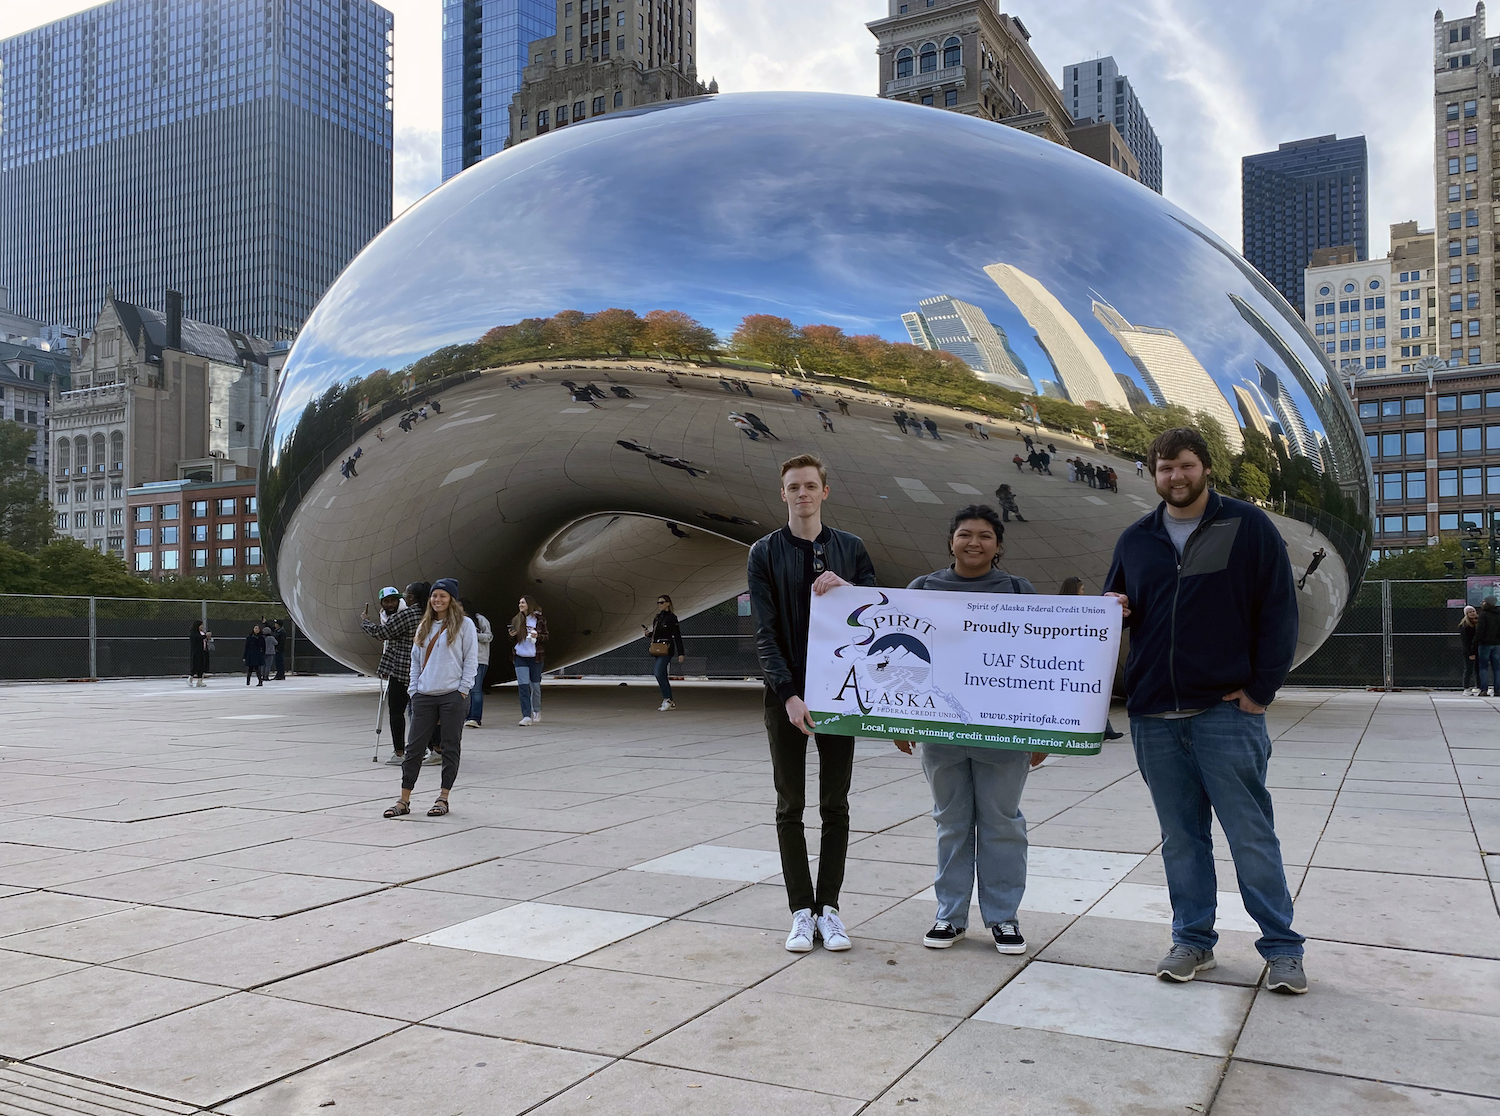 SIF students Nikolai Unruh, Jenifer Garcia and Bryan Sauer visit "The Bean" (Cloud Gate) sculpture during their trip to the 2021 Student Managed Investment Fund Consortium Conference in Chicago, IL